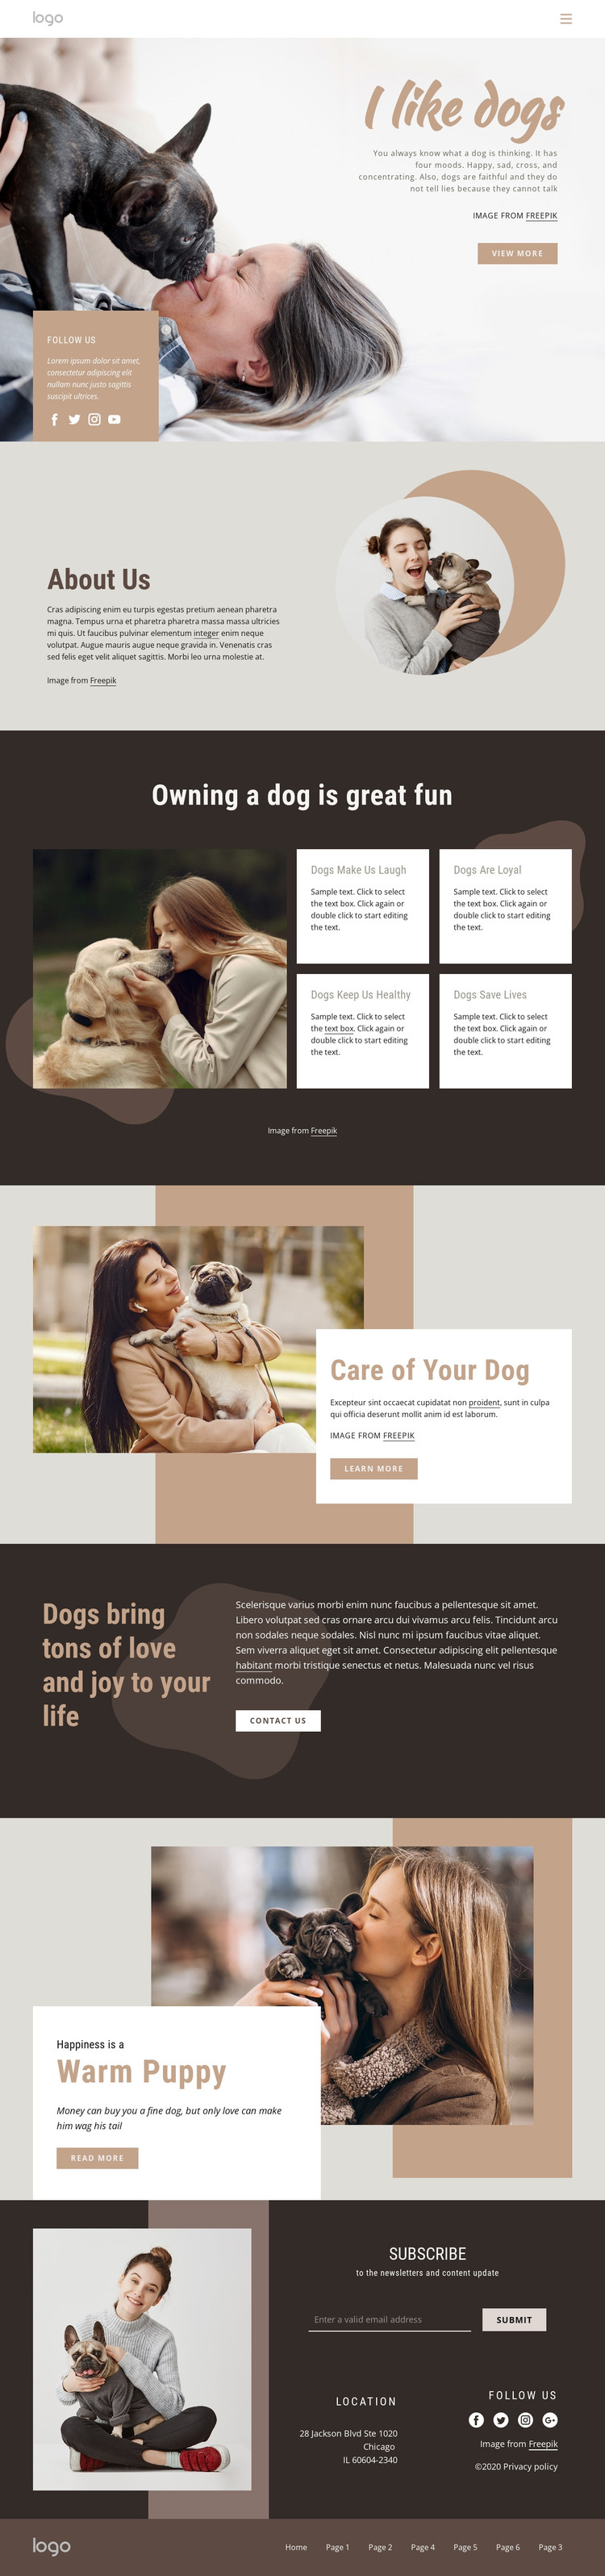 All about dogs WordPress Theme